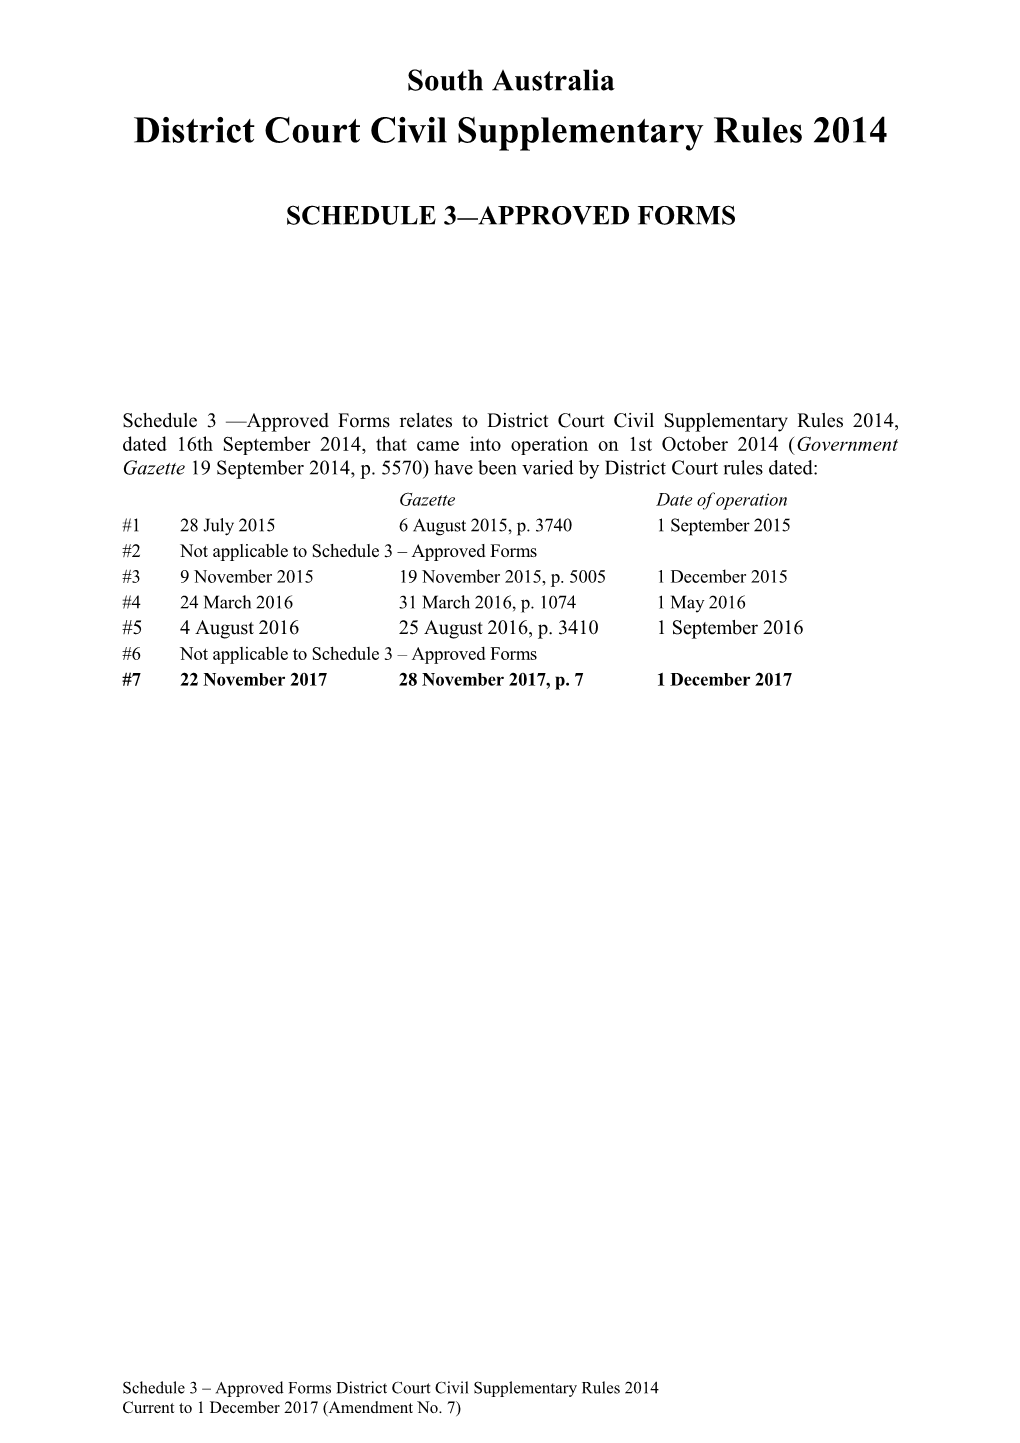 District Court Civil Supplementary Rules 2014 - Schedule 3 - Approved Forms